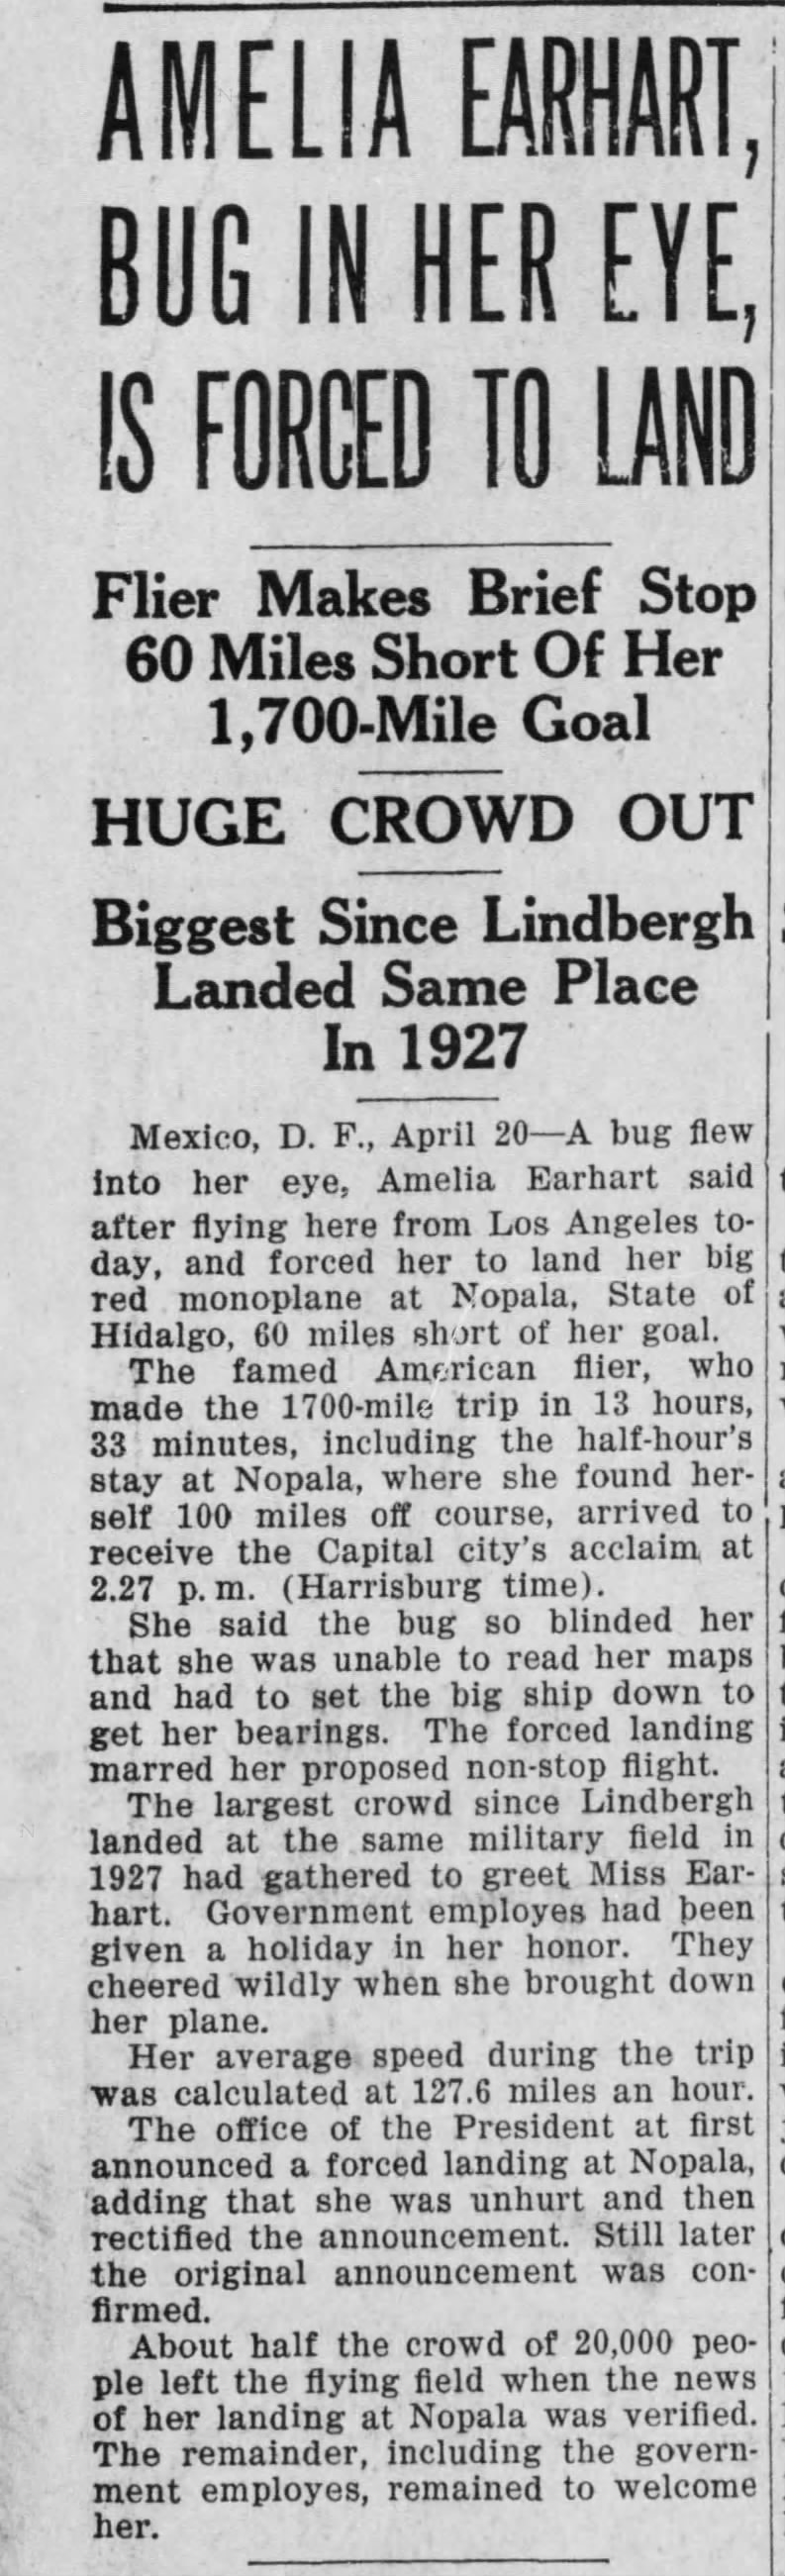 Amelia Earhart flies solo from LA to Mexico